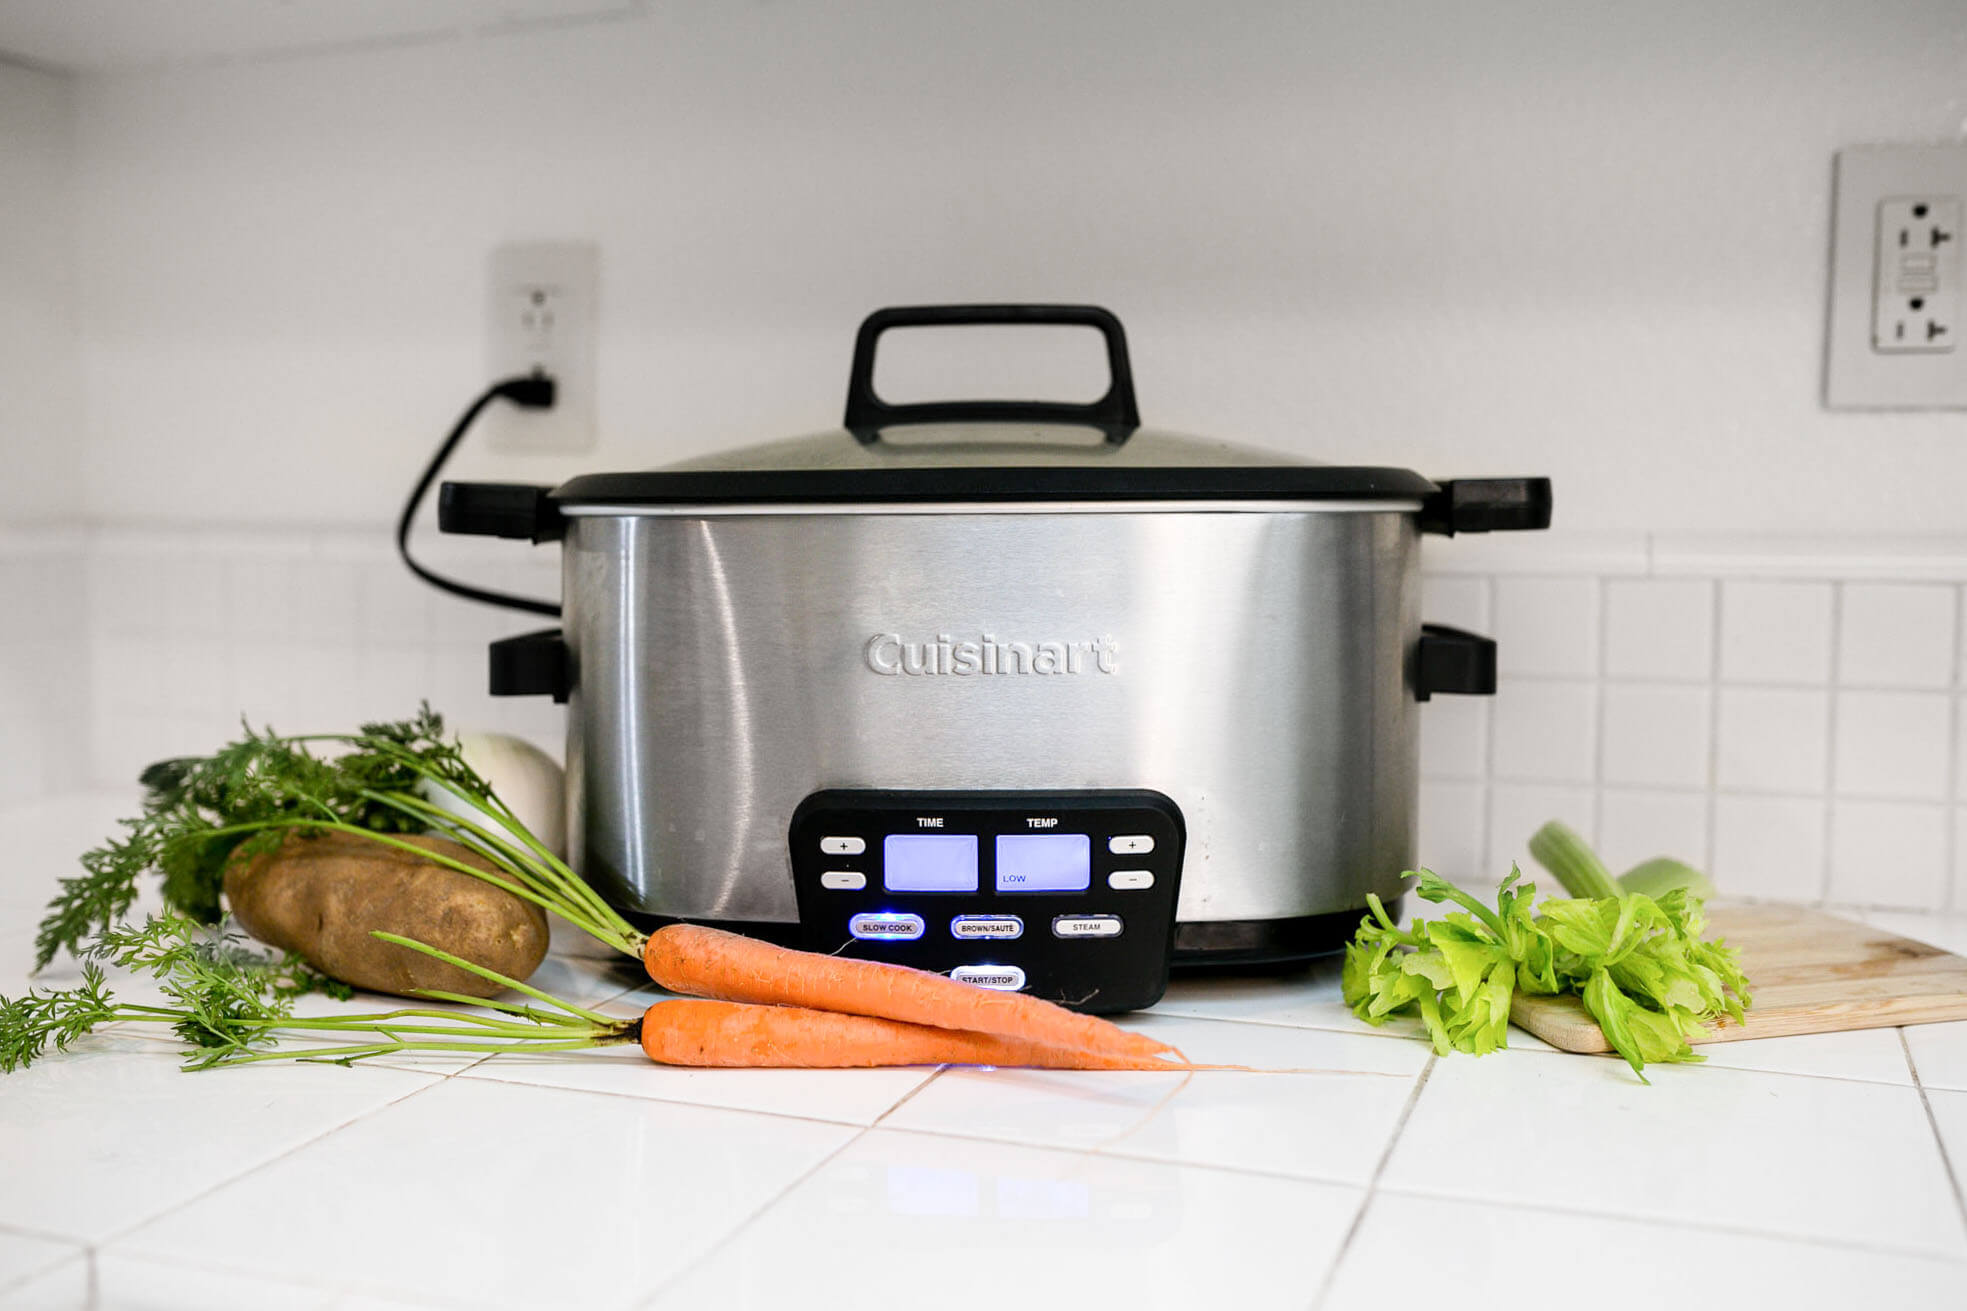 Cuisinart Cook Central 6 Qt. Stainless Steel Electric Multi-Cooker